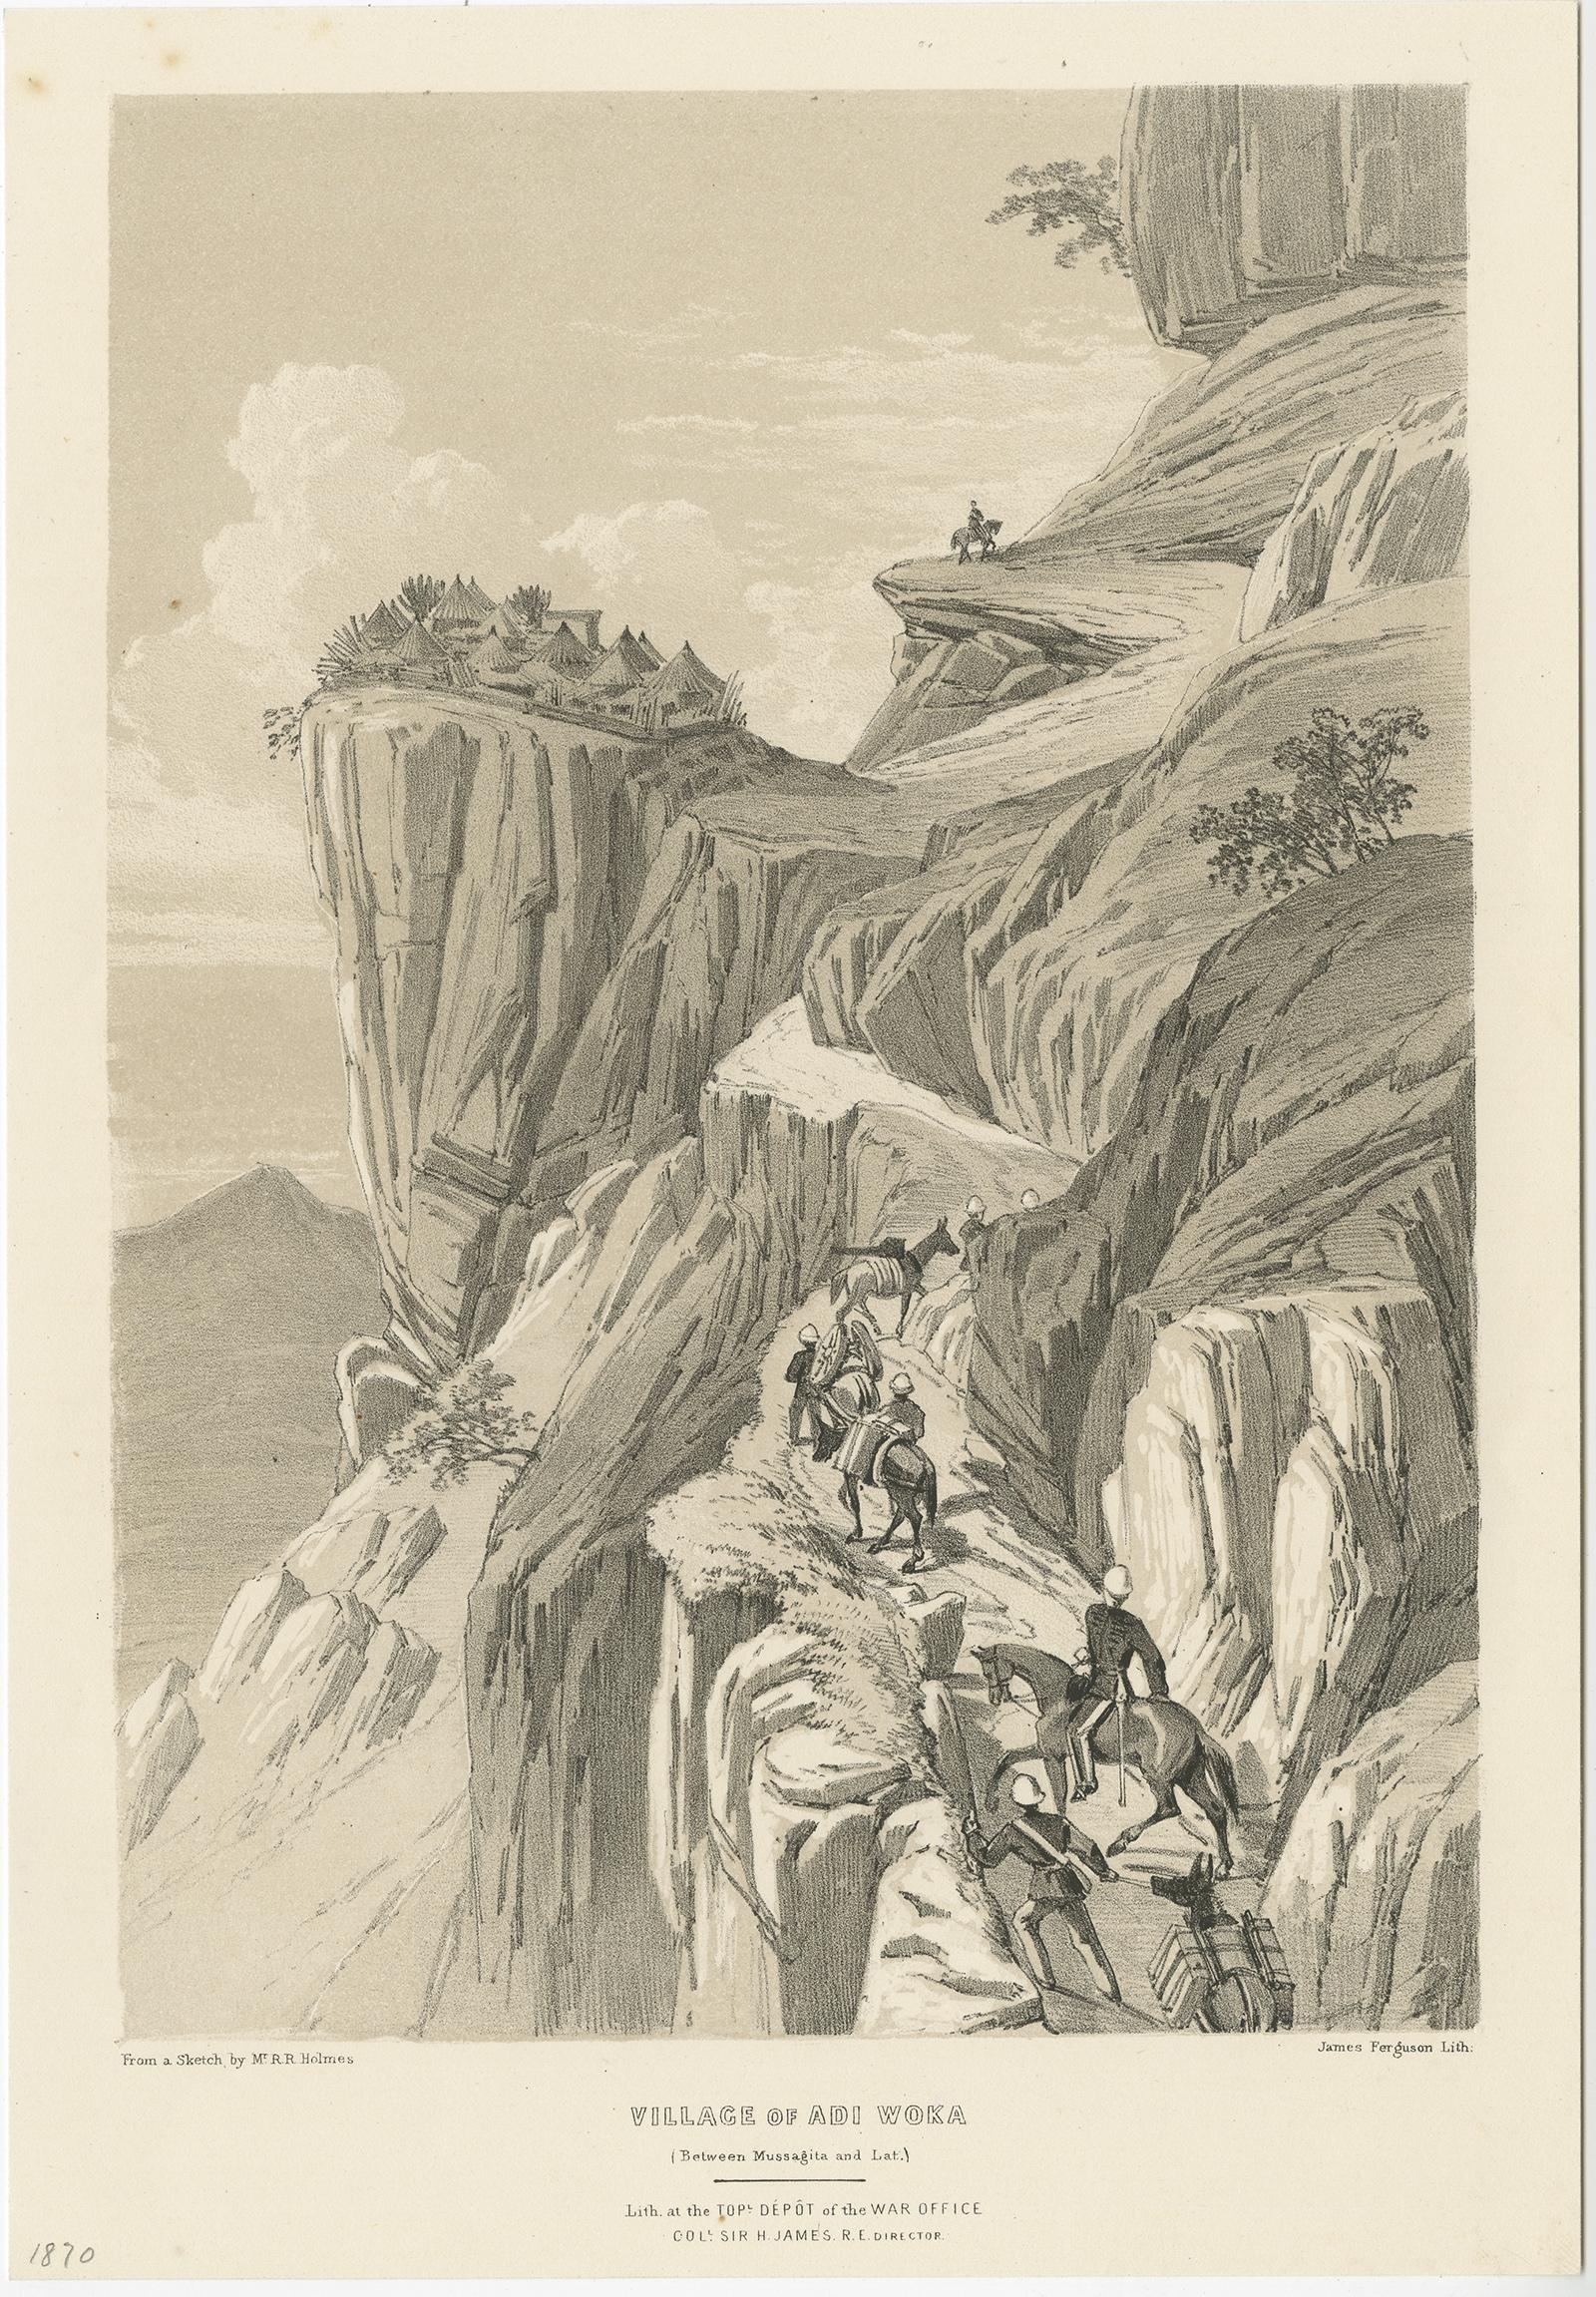 Paper Collection of Antique Prints of Robert Napier and the Magdala Expedition, 1870